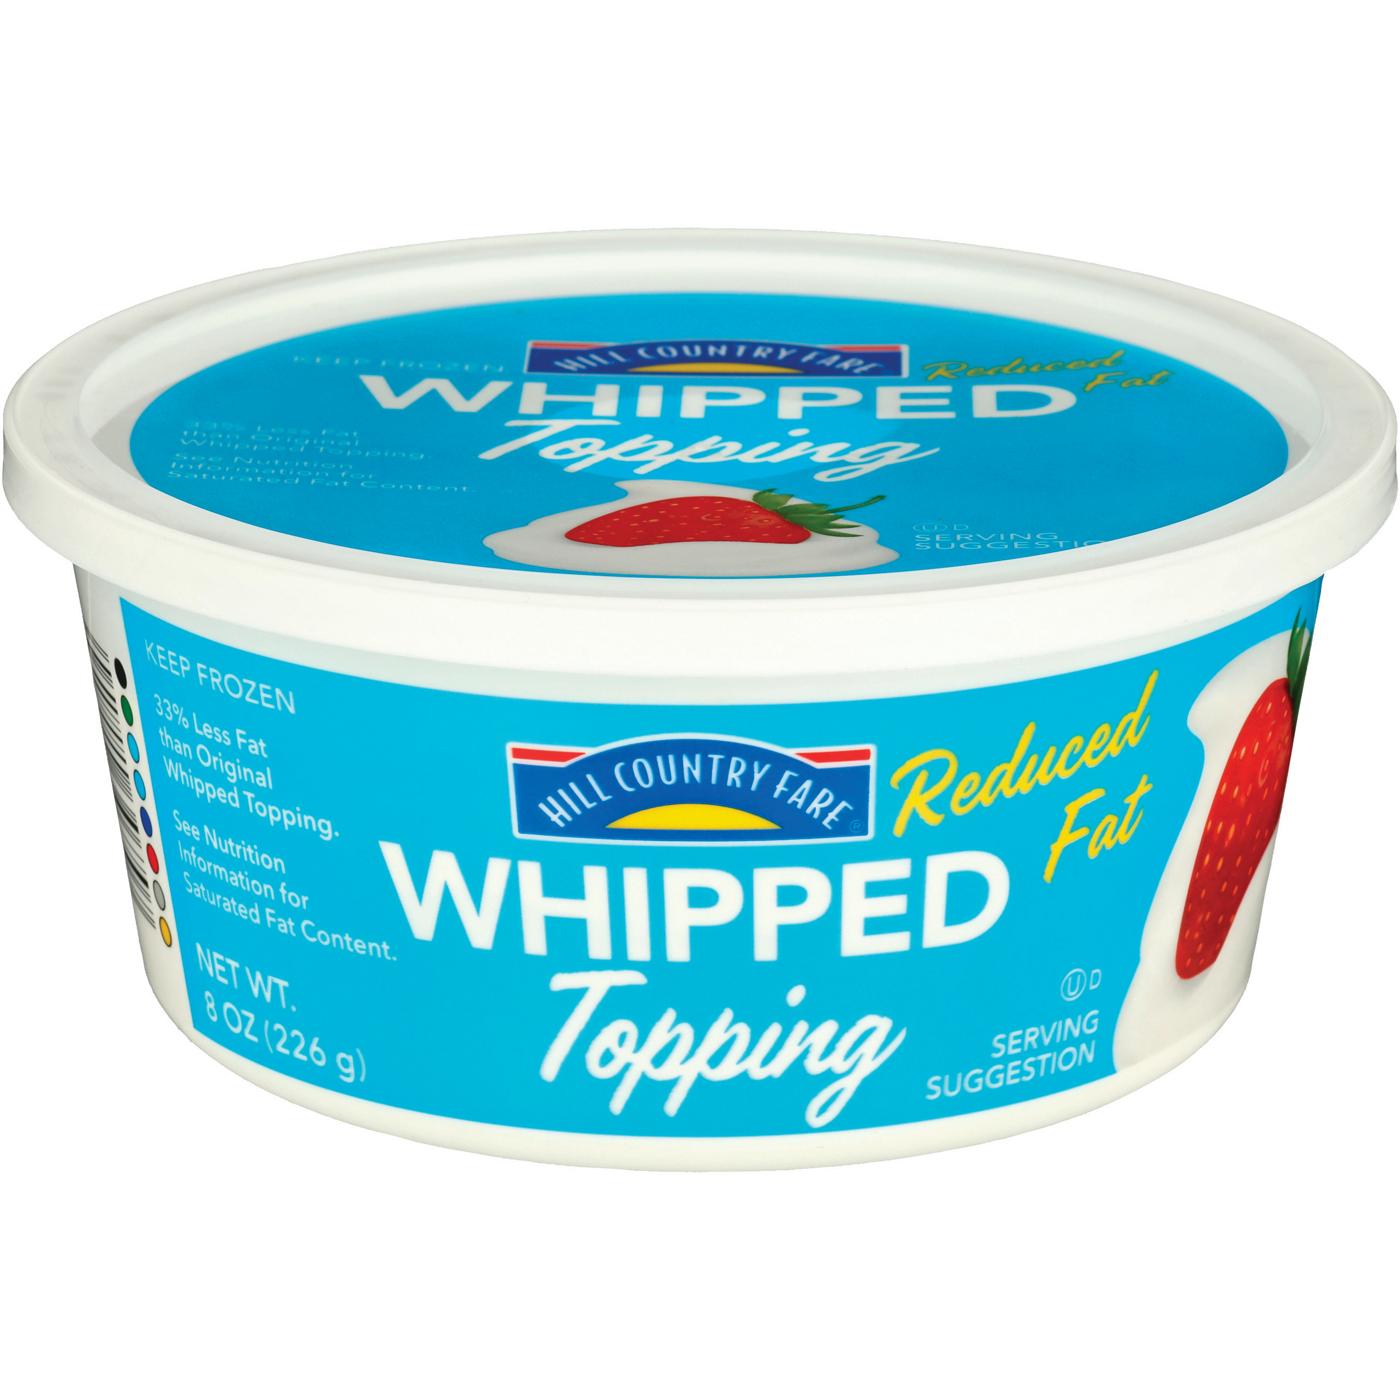 Hill Country Fare Reduced Fat Whipped Topping; image 1 of 2